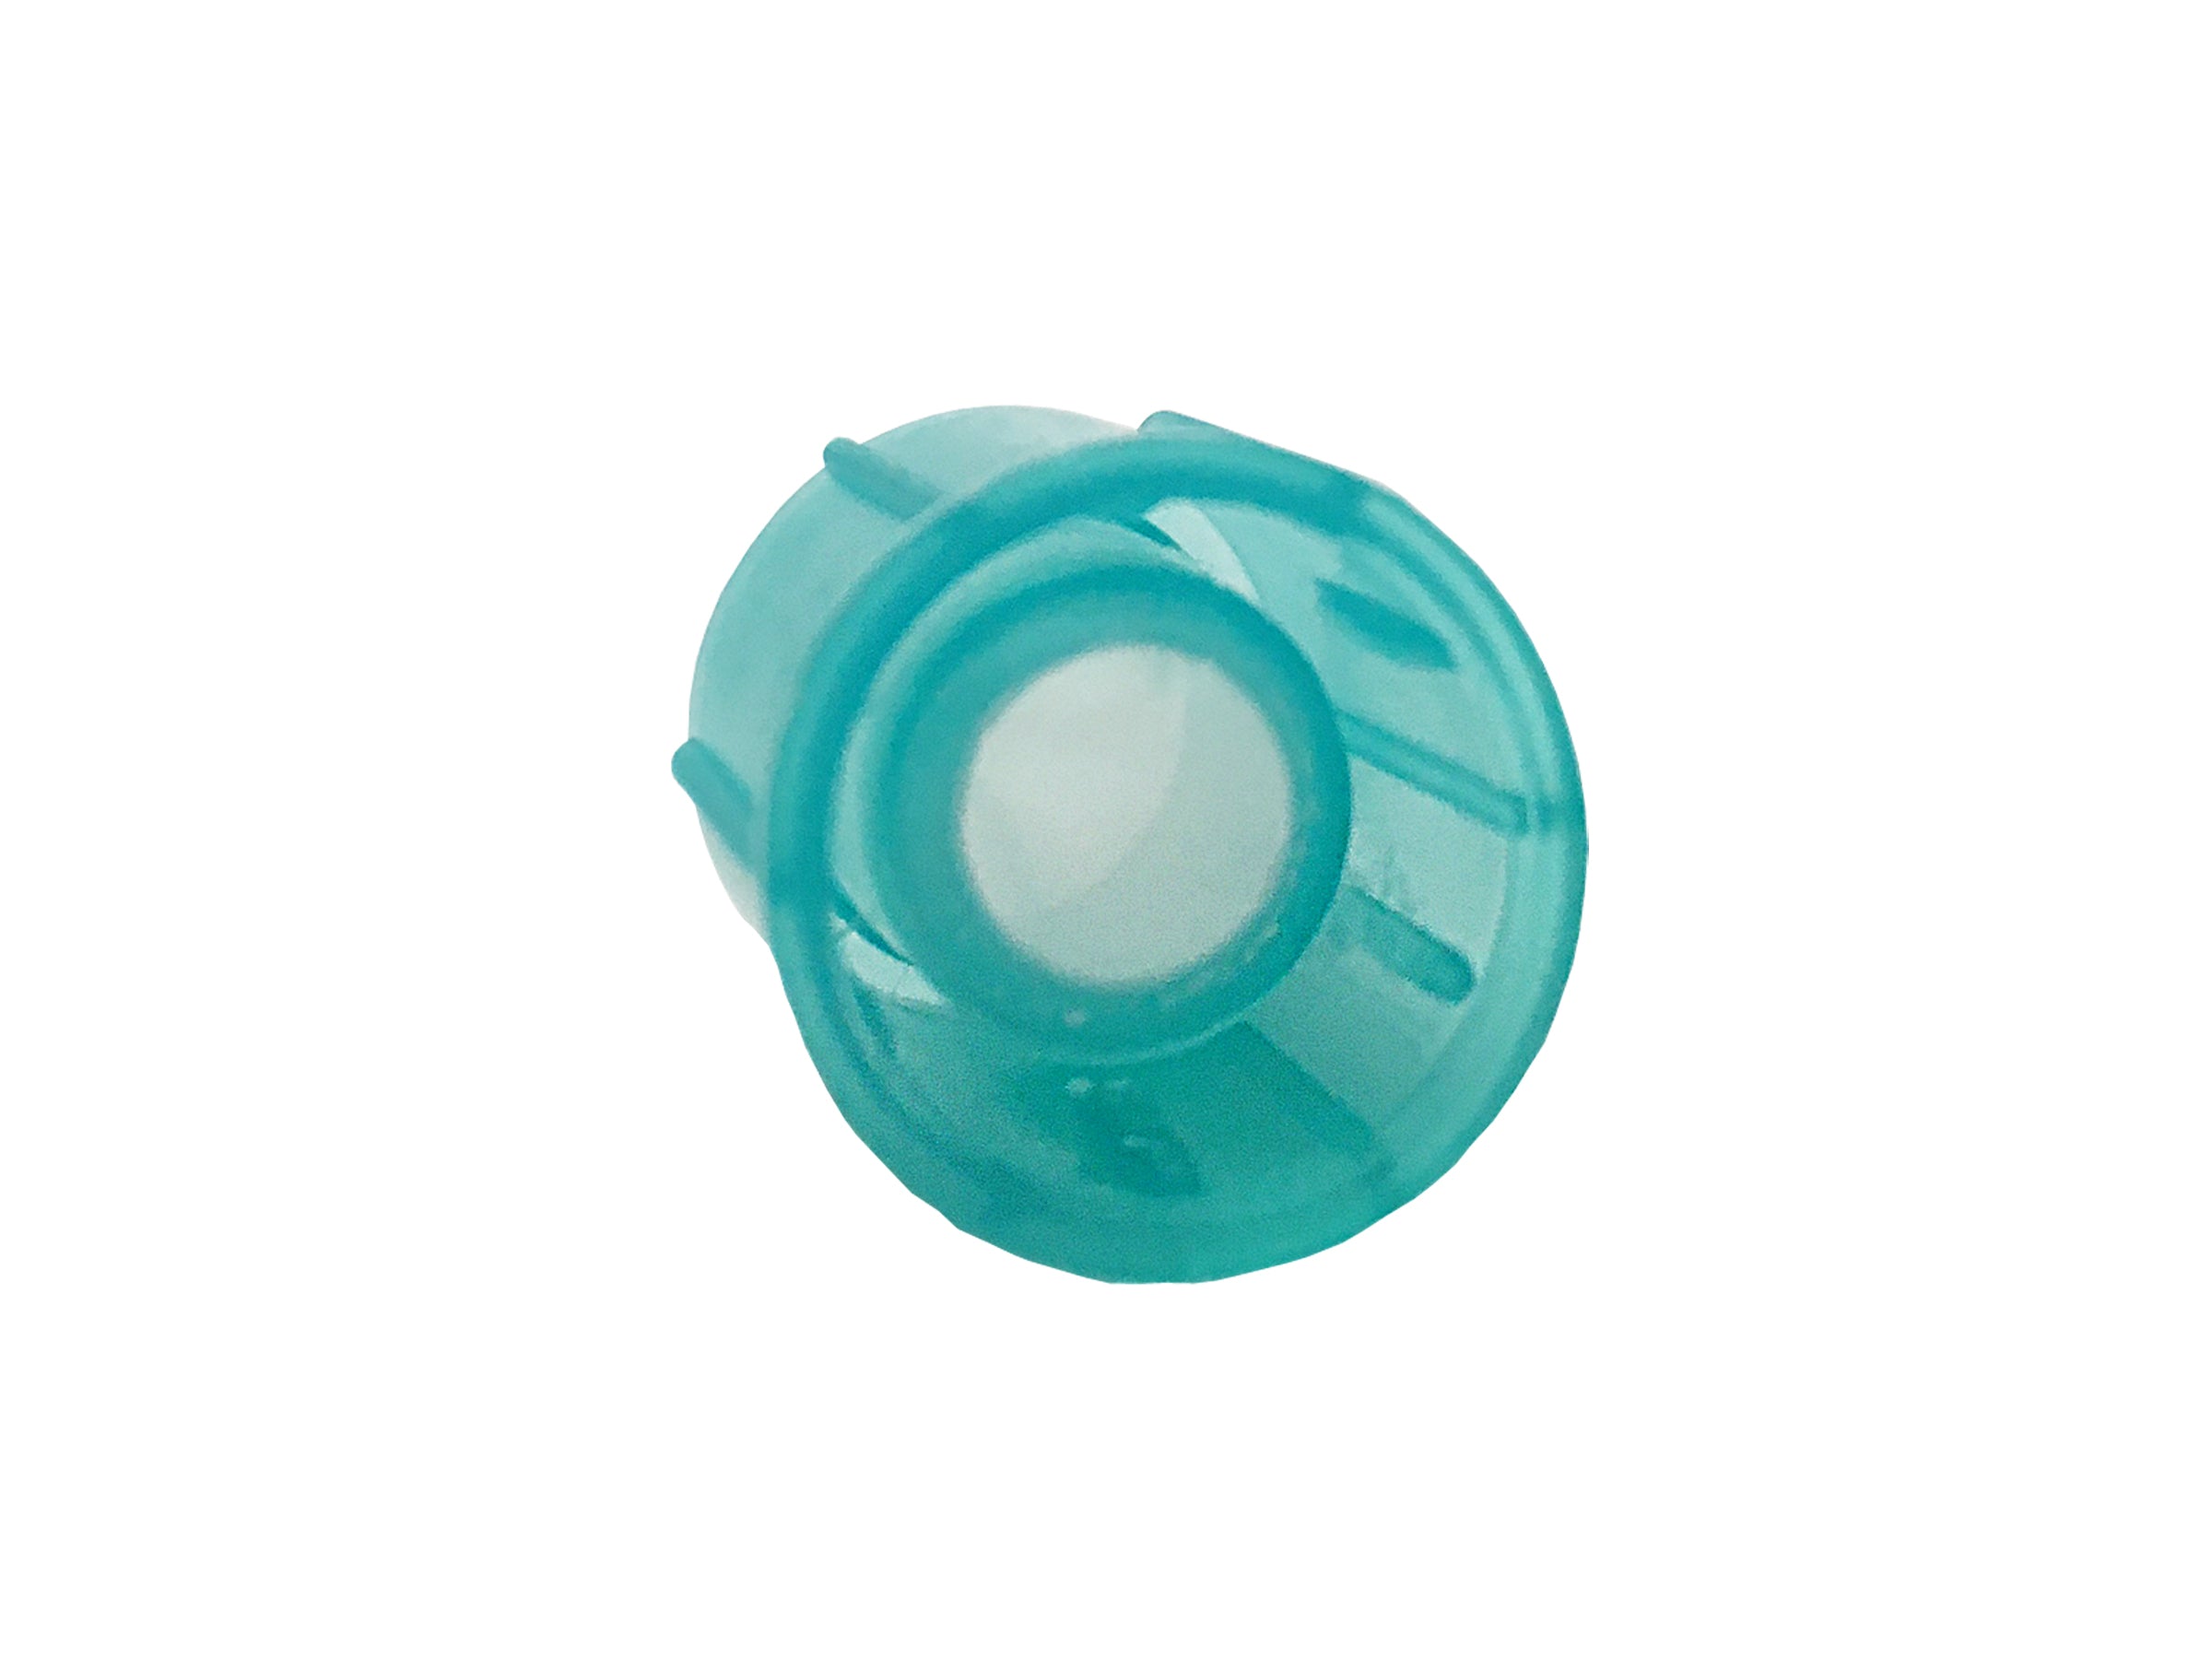 MTC Bio T9009, Strainer Cap for Flowtubes (Cap Only), with 35µm Strainer Mesh, Sterile, 20 Bags of 25 Caps, 500/pack